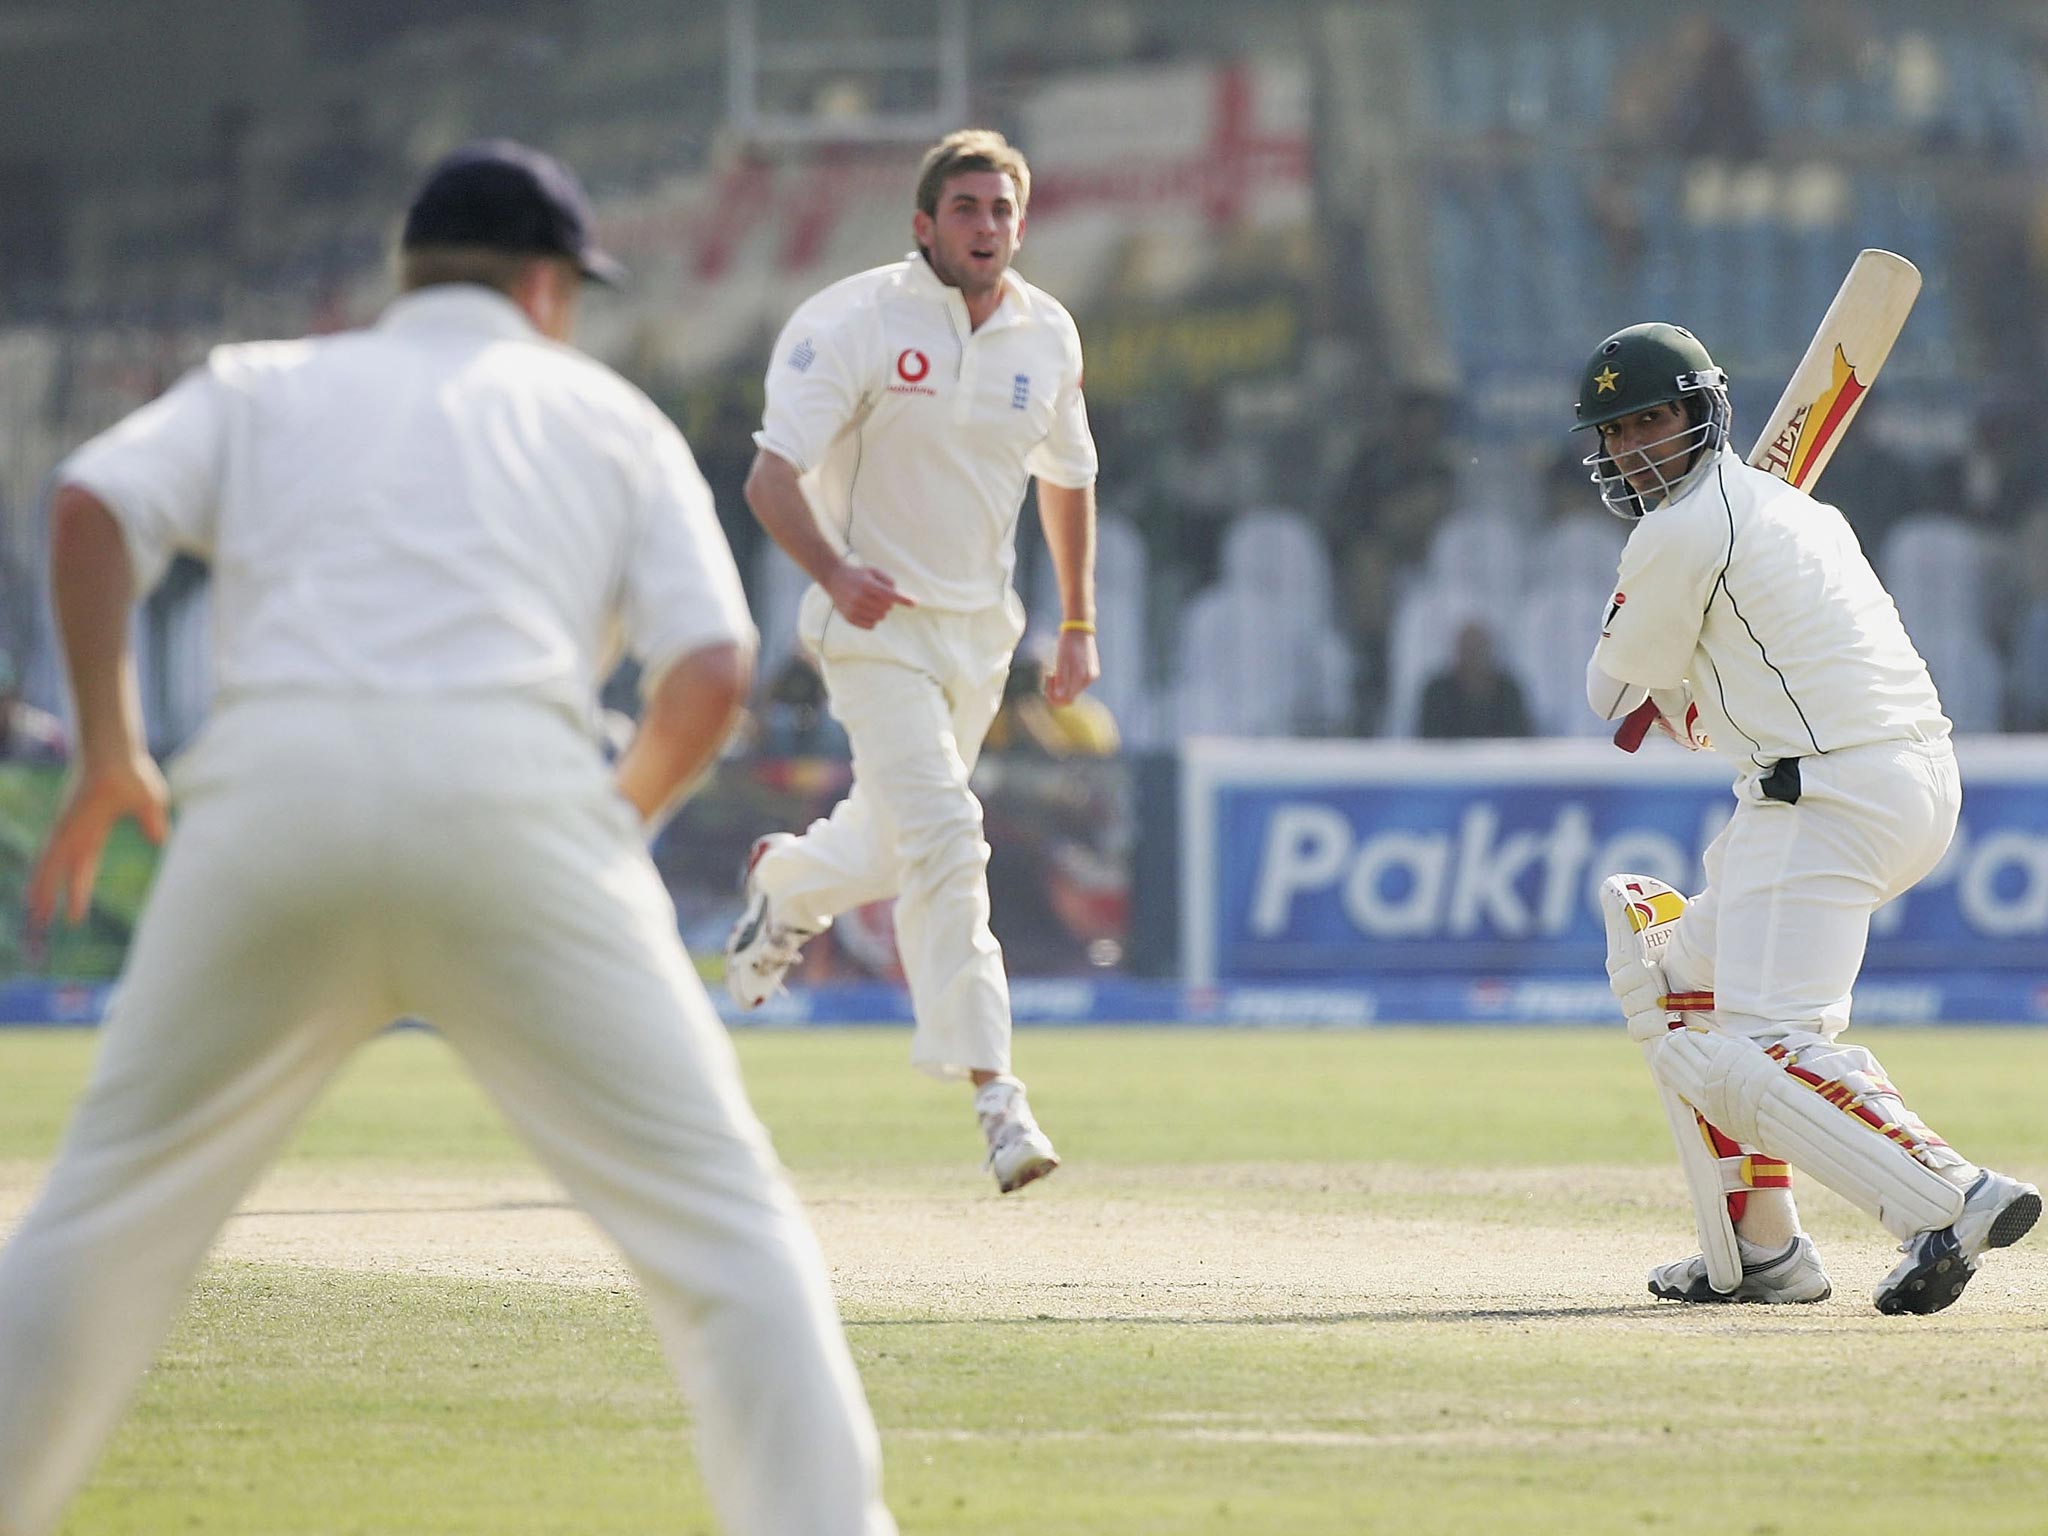 Liam Plunkett takes his first Test wicket on his debut in Lahore against Pakistan in
2005